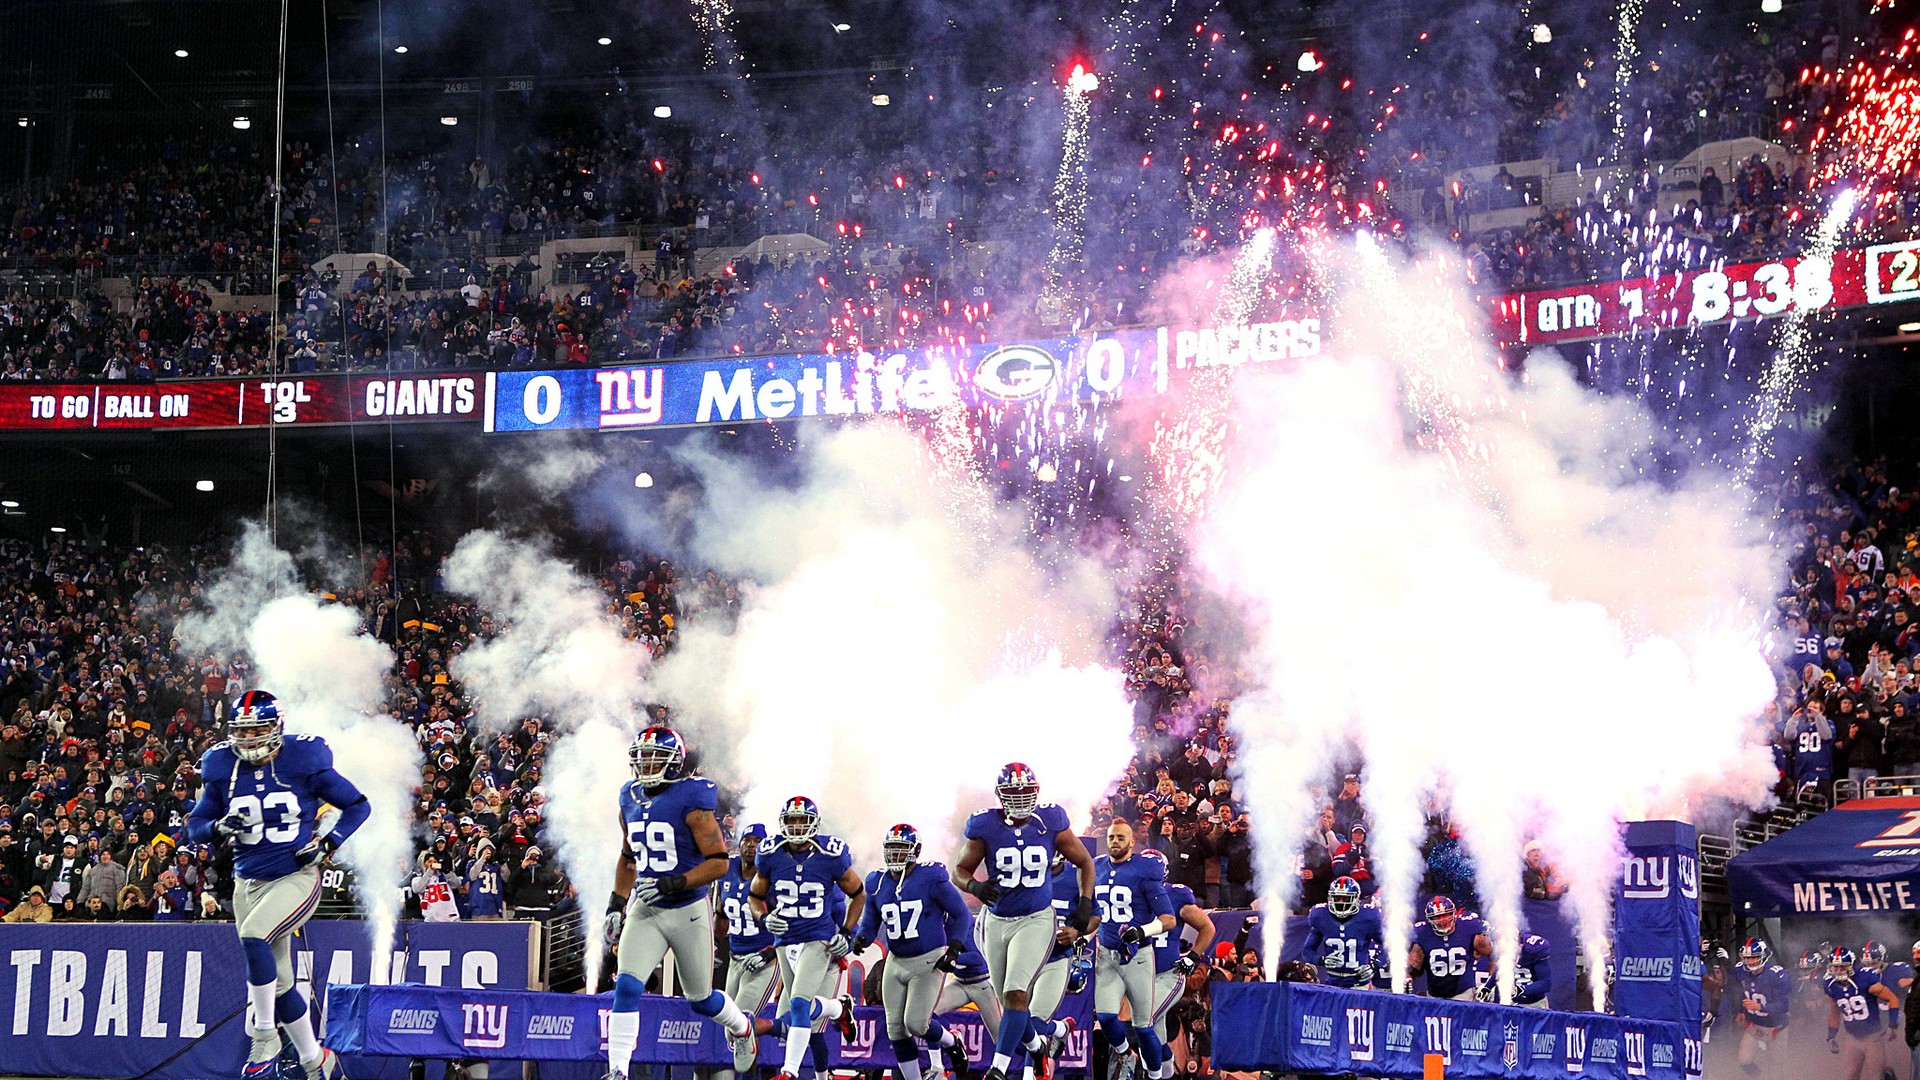 HD Desktop Wallpaper New York Giants NFL With high-resolution 1920X1080 pixel. You can use this wallpaper for your Mac or Windows Desktop Background, iPhone, Android or Tablet and another Smartphone device